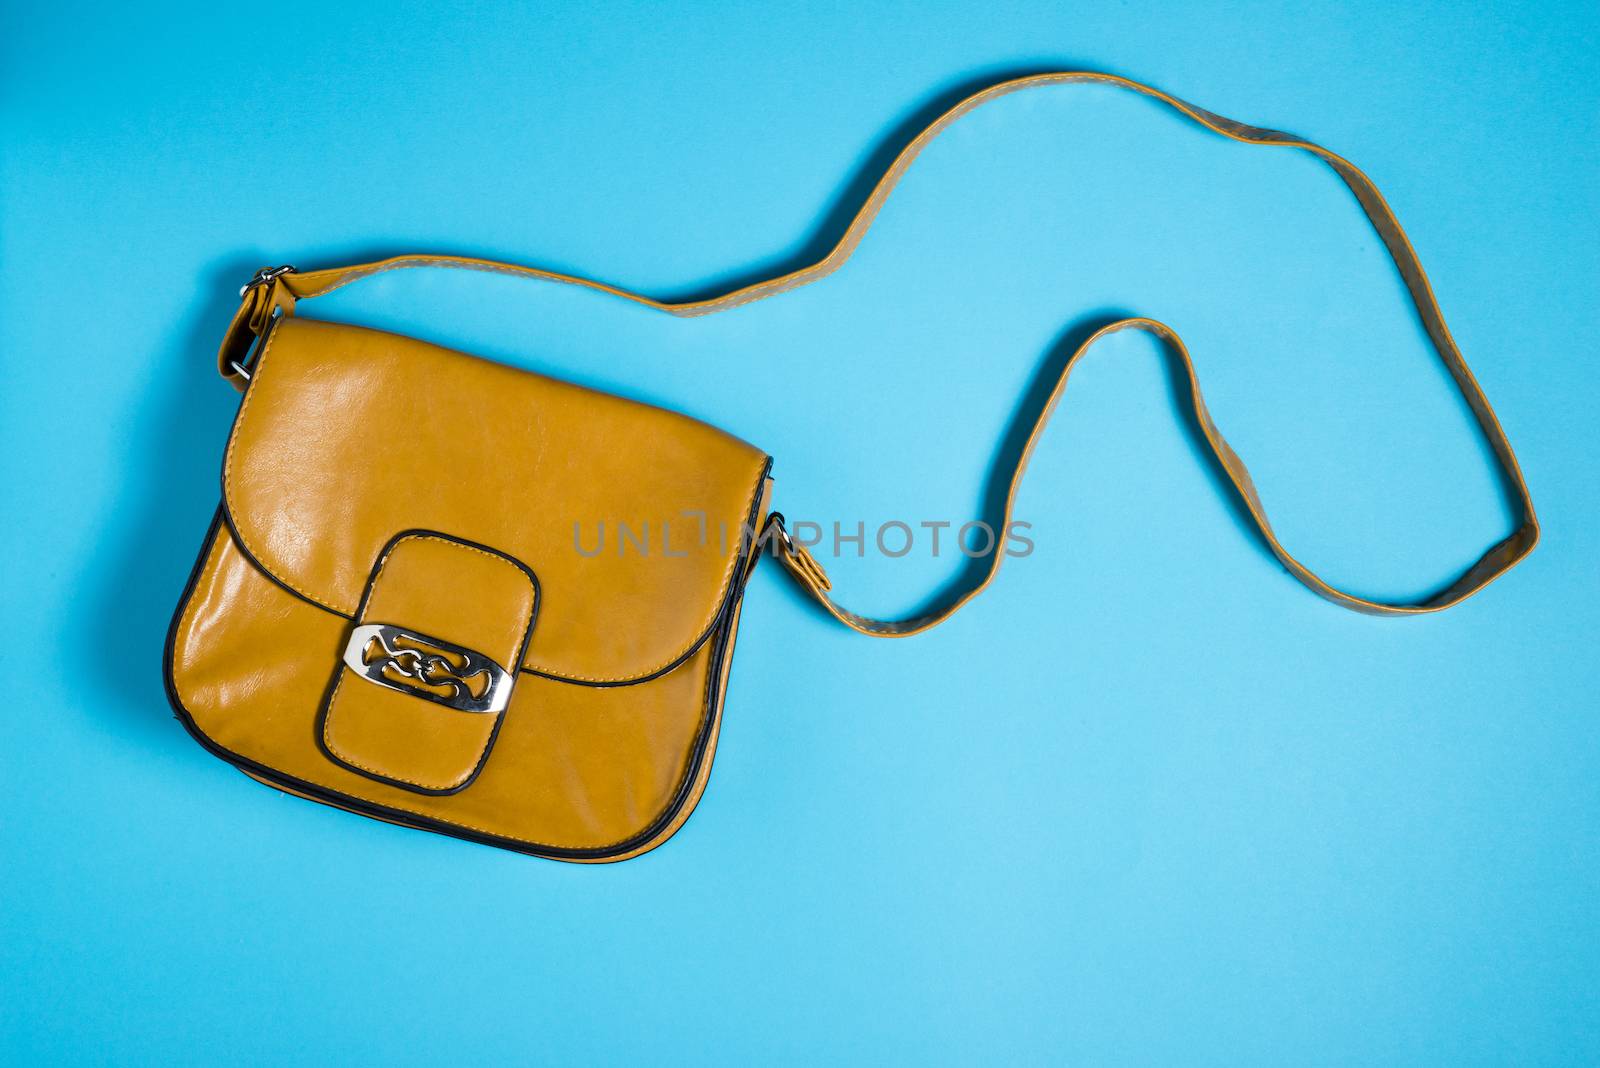 Woman leather purse on blue background by marius_dragne